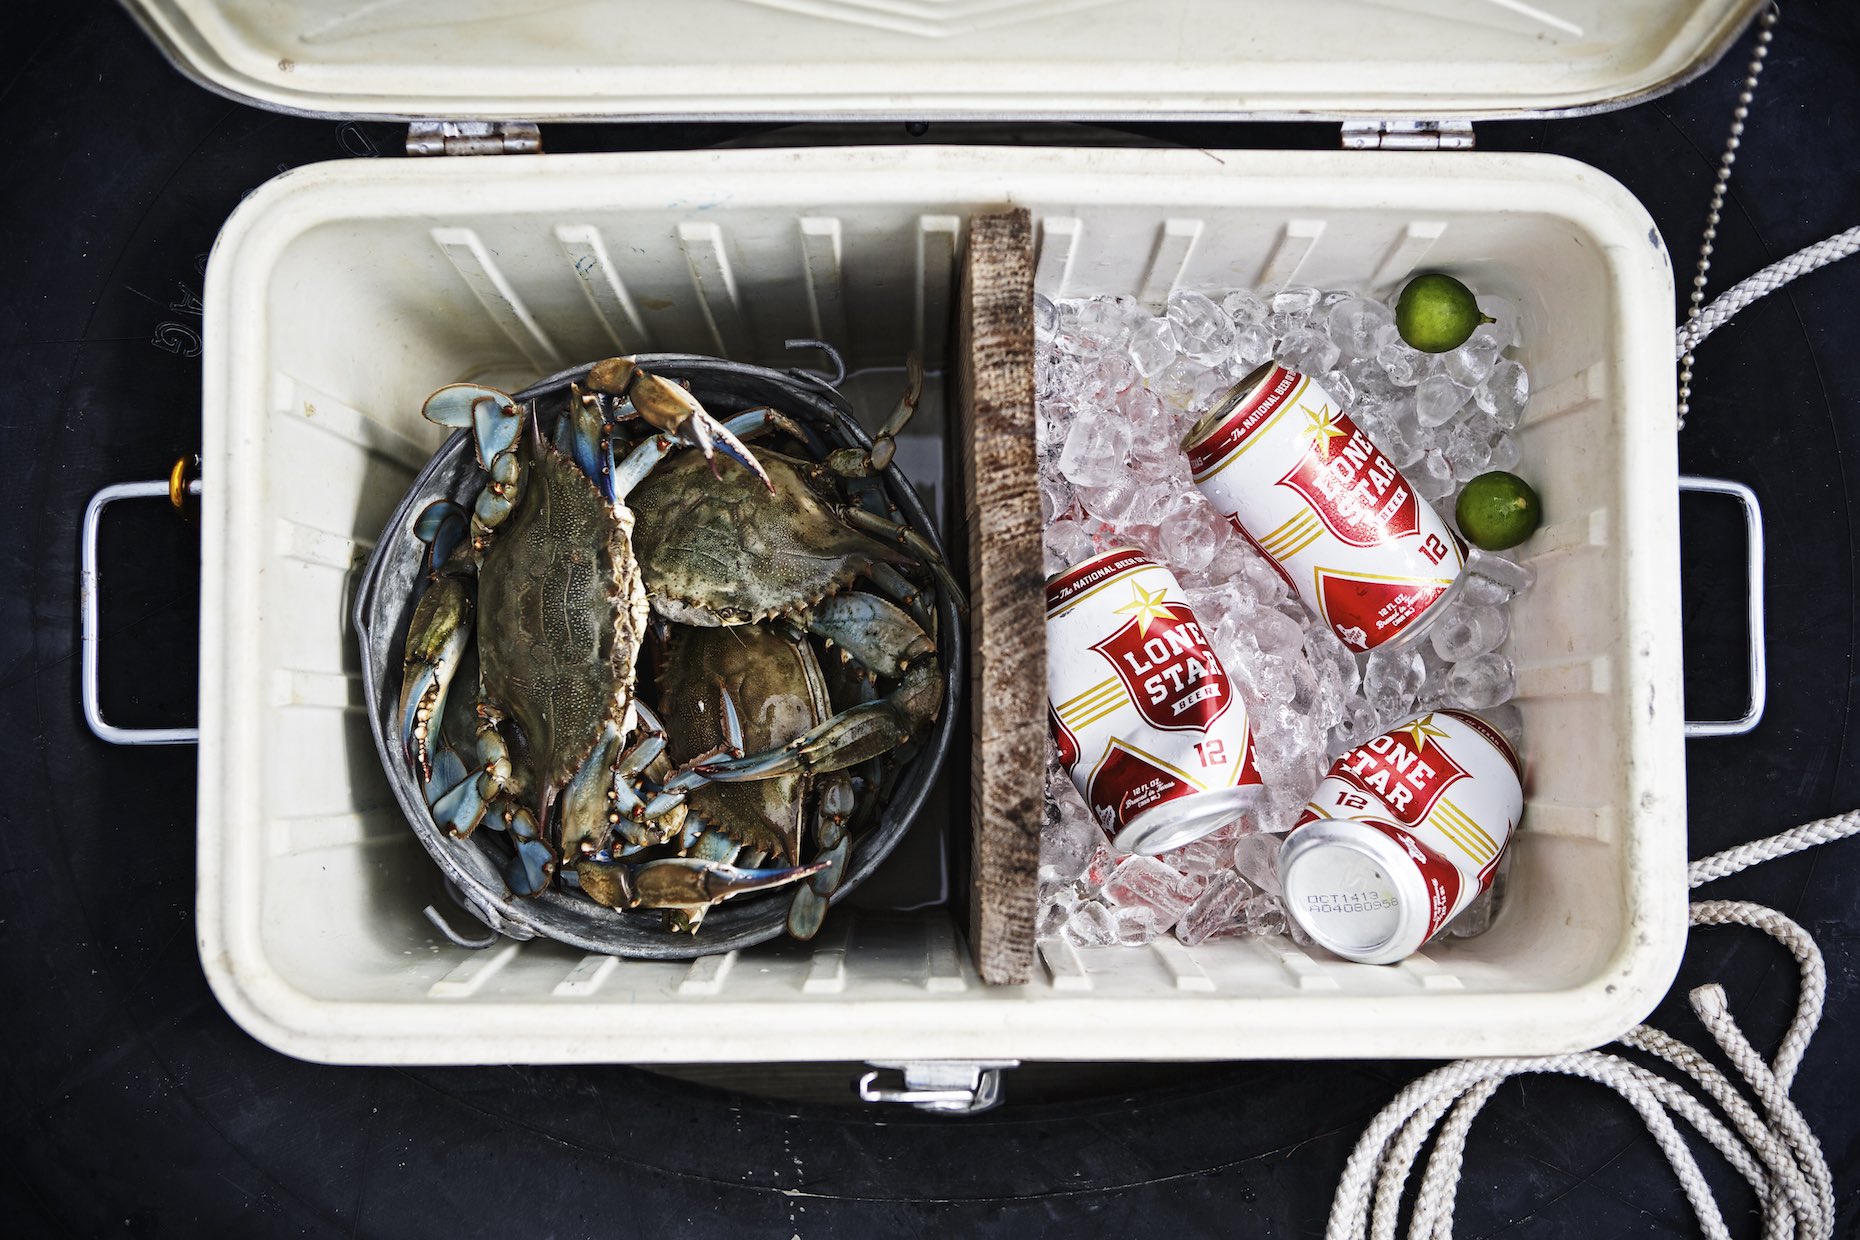 Cooler filled with whole, blue crabs and cans of Lonestar. 